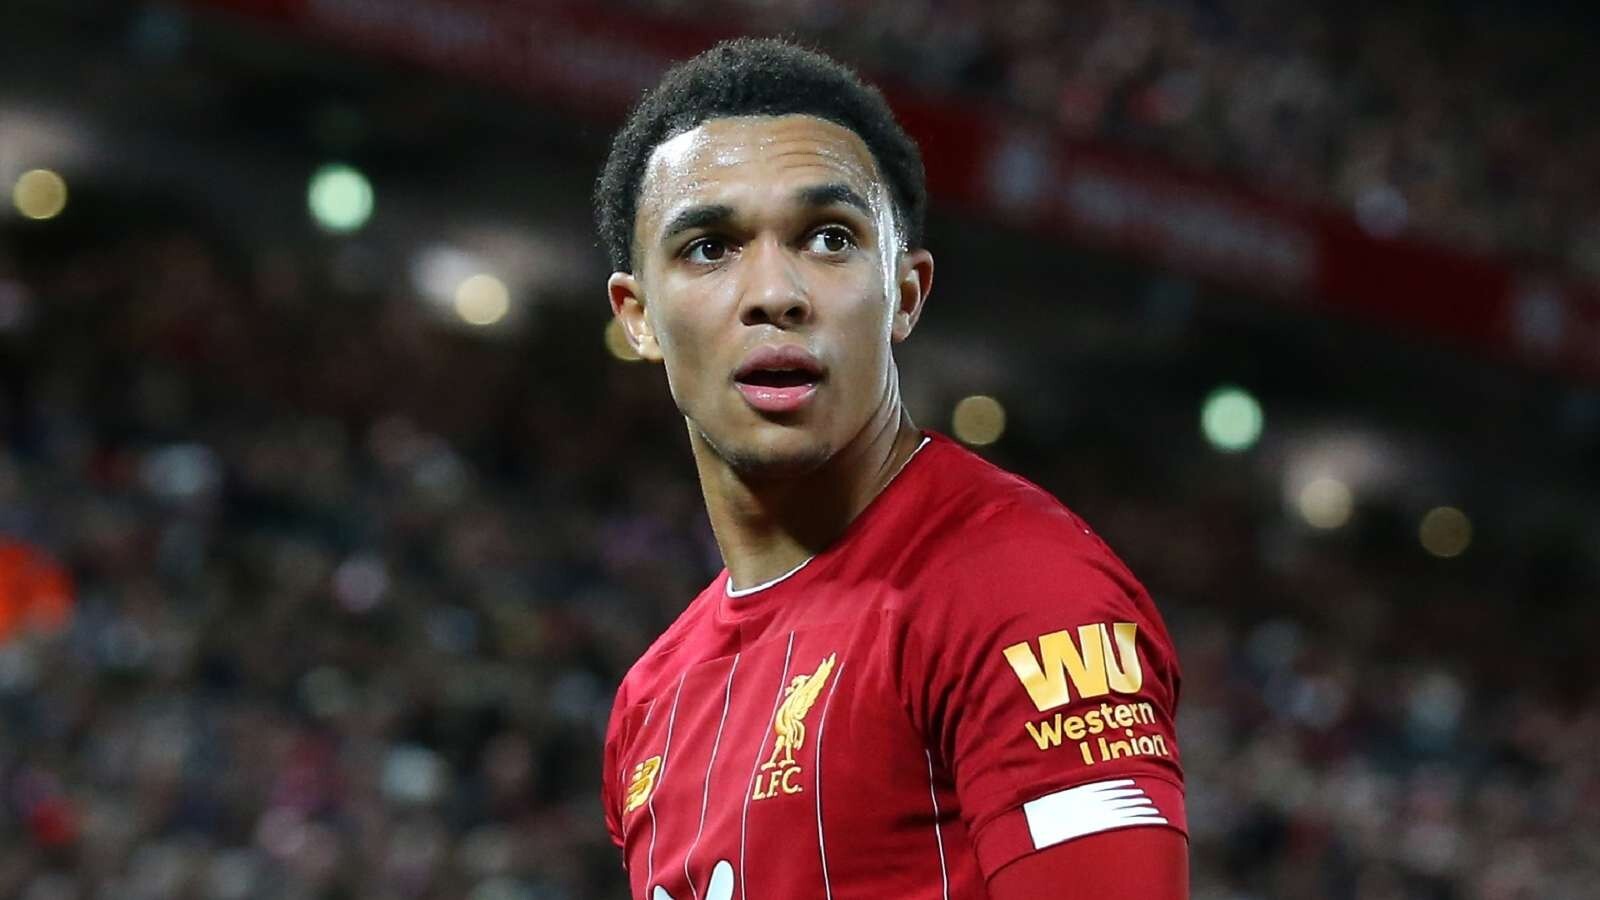 Trent Alexander-Arnold remarked on Liverpool's dry spell end win  